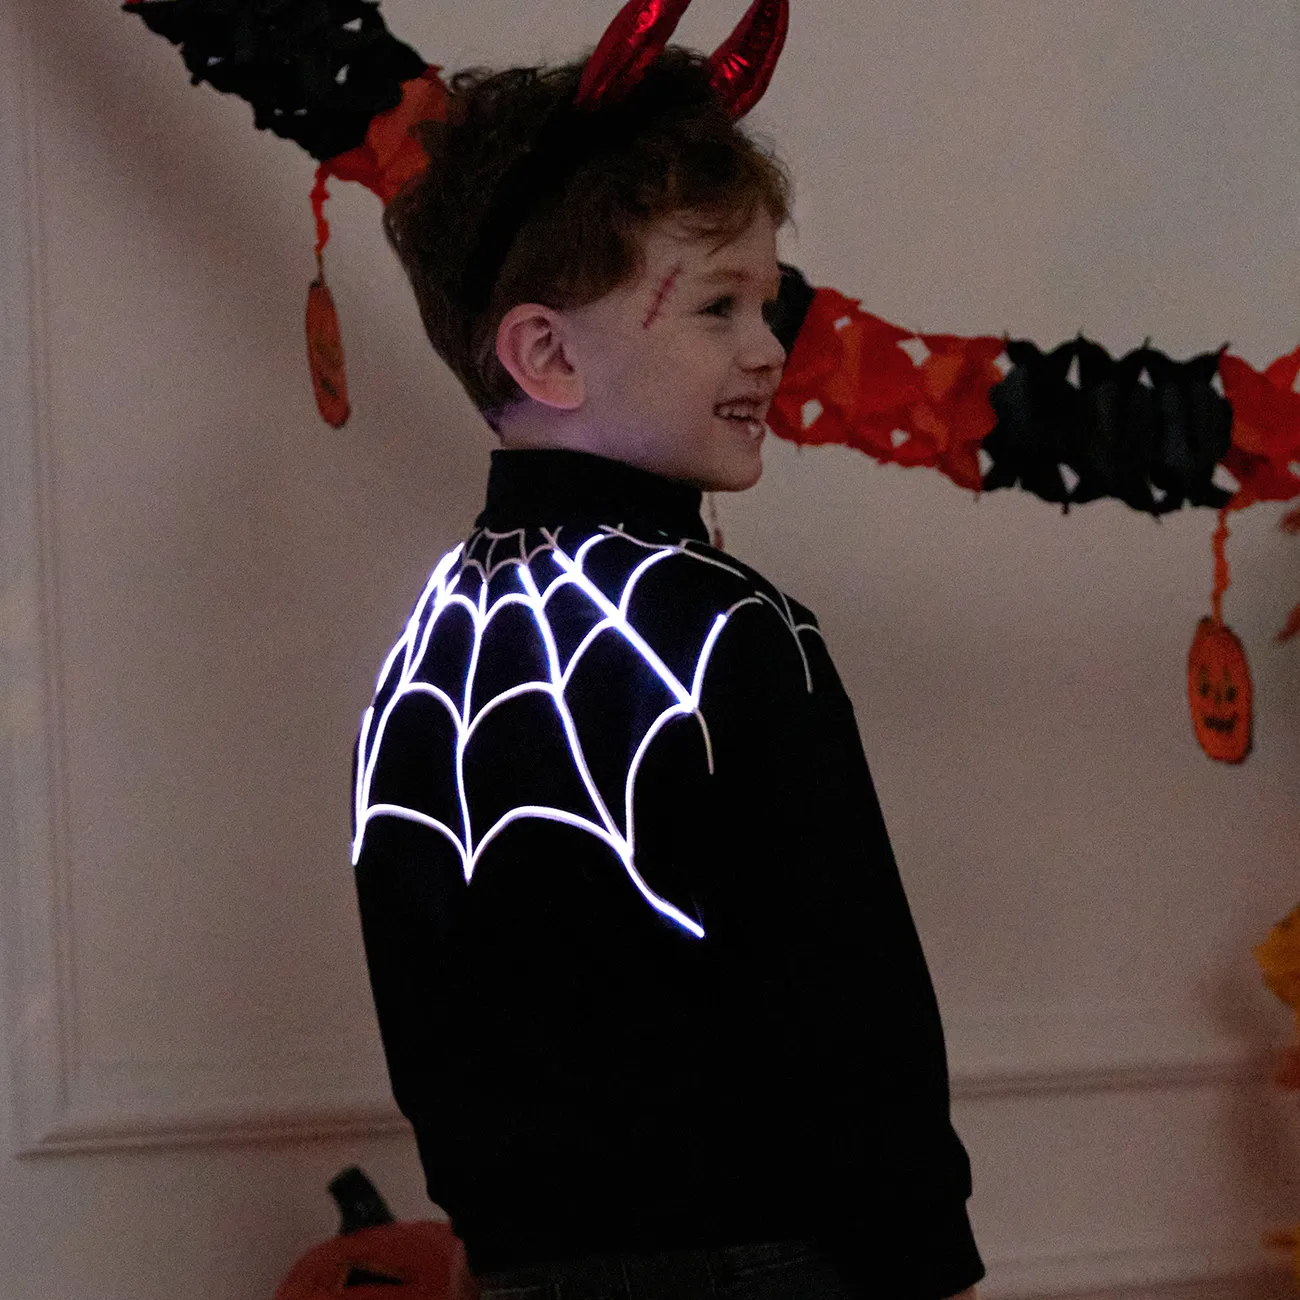 Go-Glow Illuminating Jacket with Light Up Embroidered Spider Web Including Controller (Built-In Battery) Black big image 1